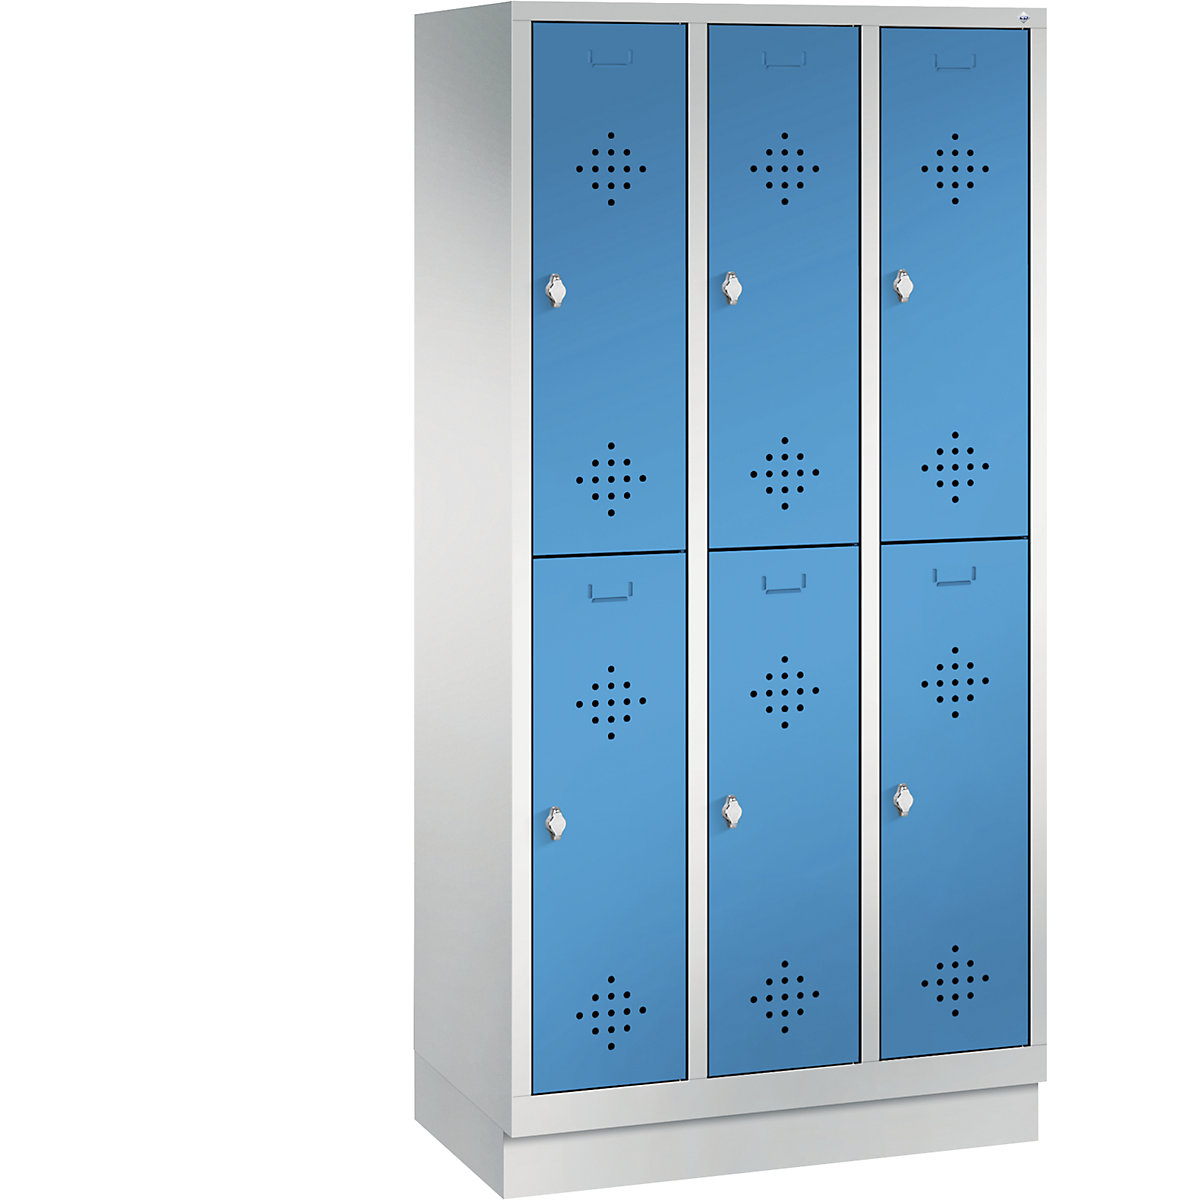 CLASSIC cloakroom locker with plinth, double tier – C+P, 3 compartments, 2 shelf compartments each, compartment width 300 mm, light grey / light blue-5